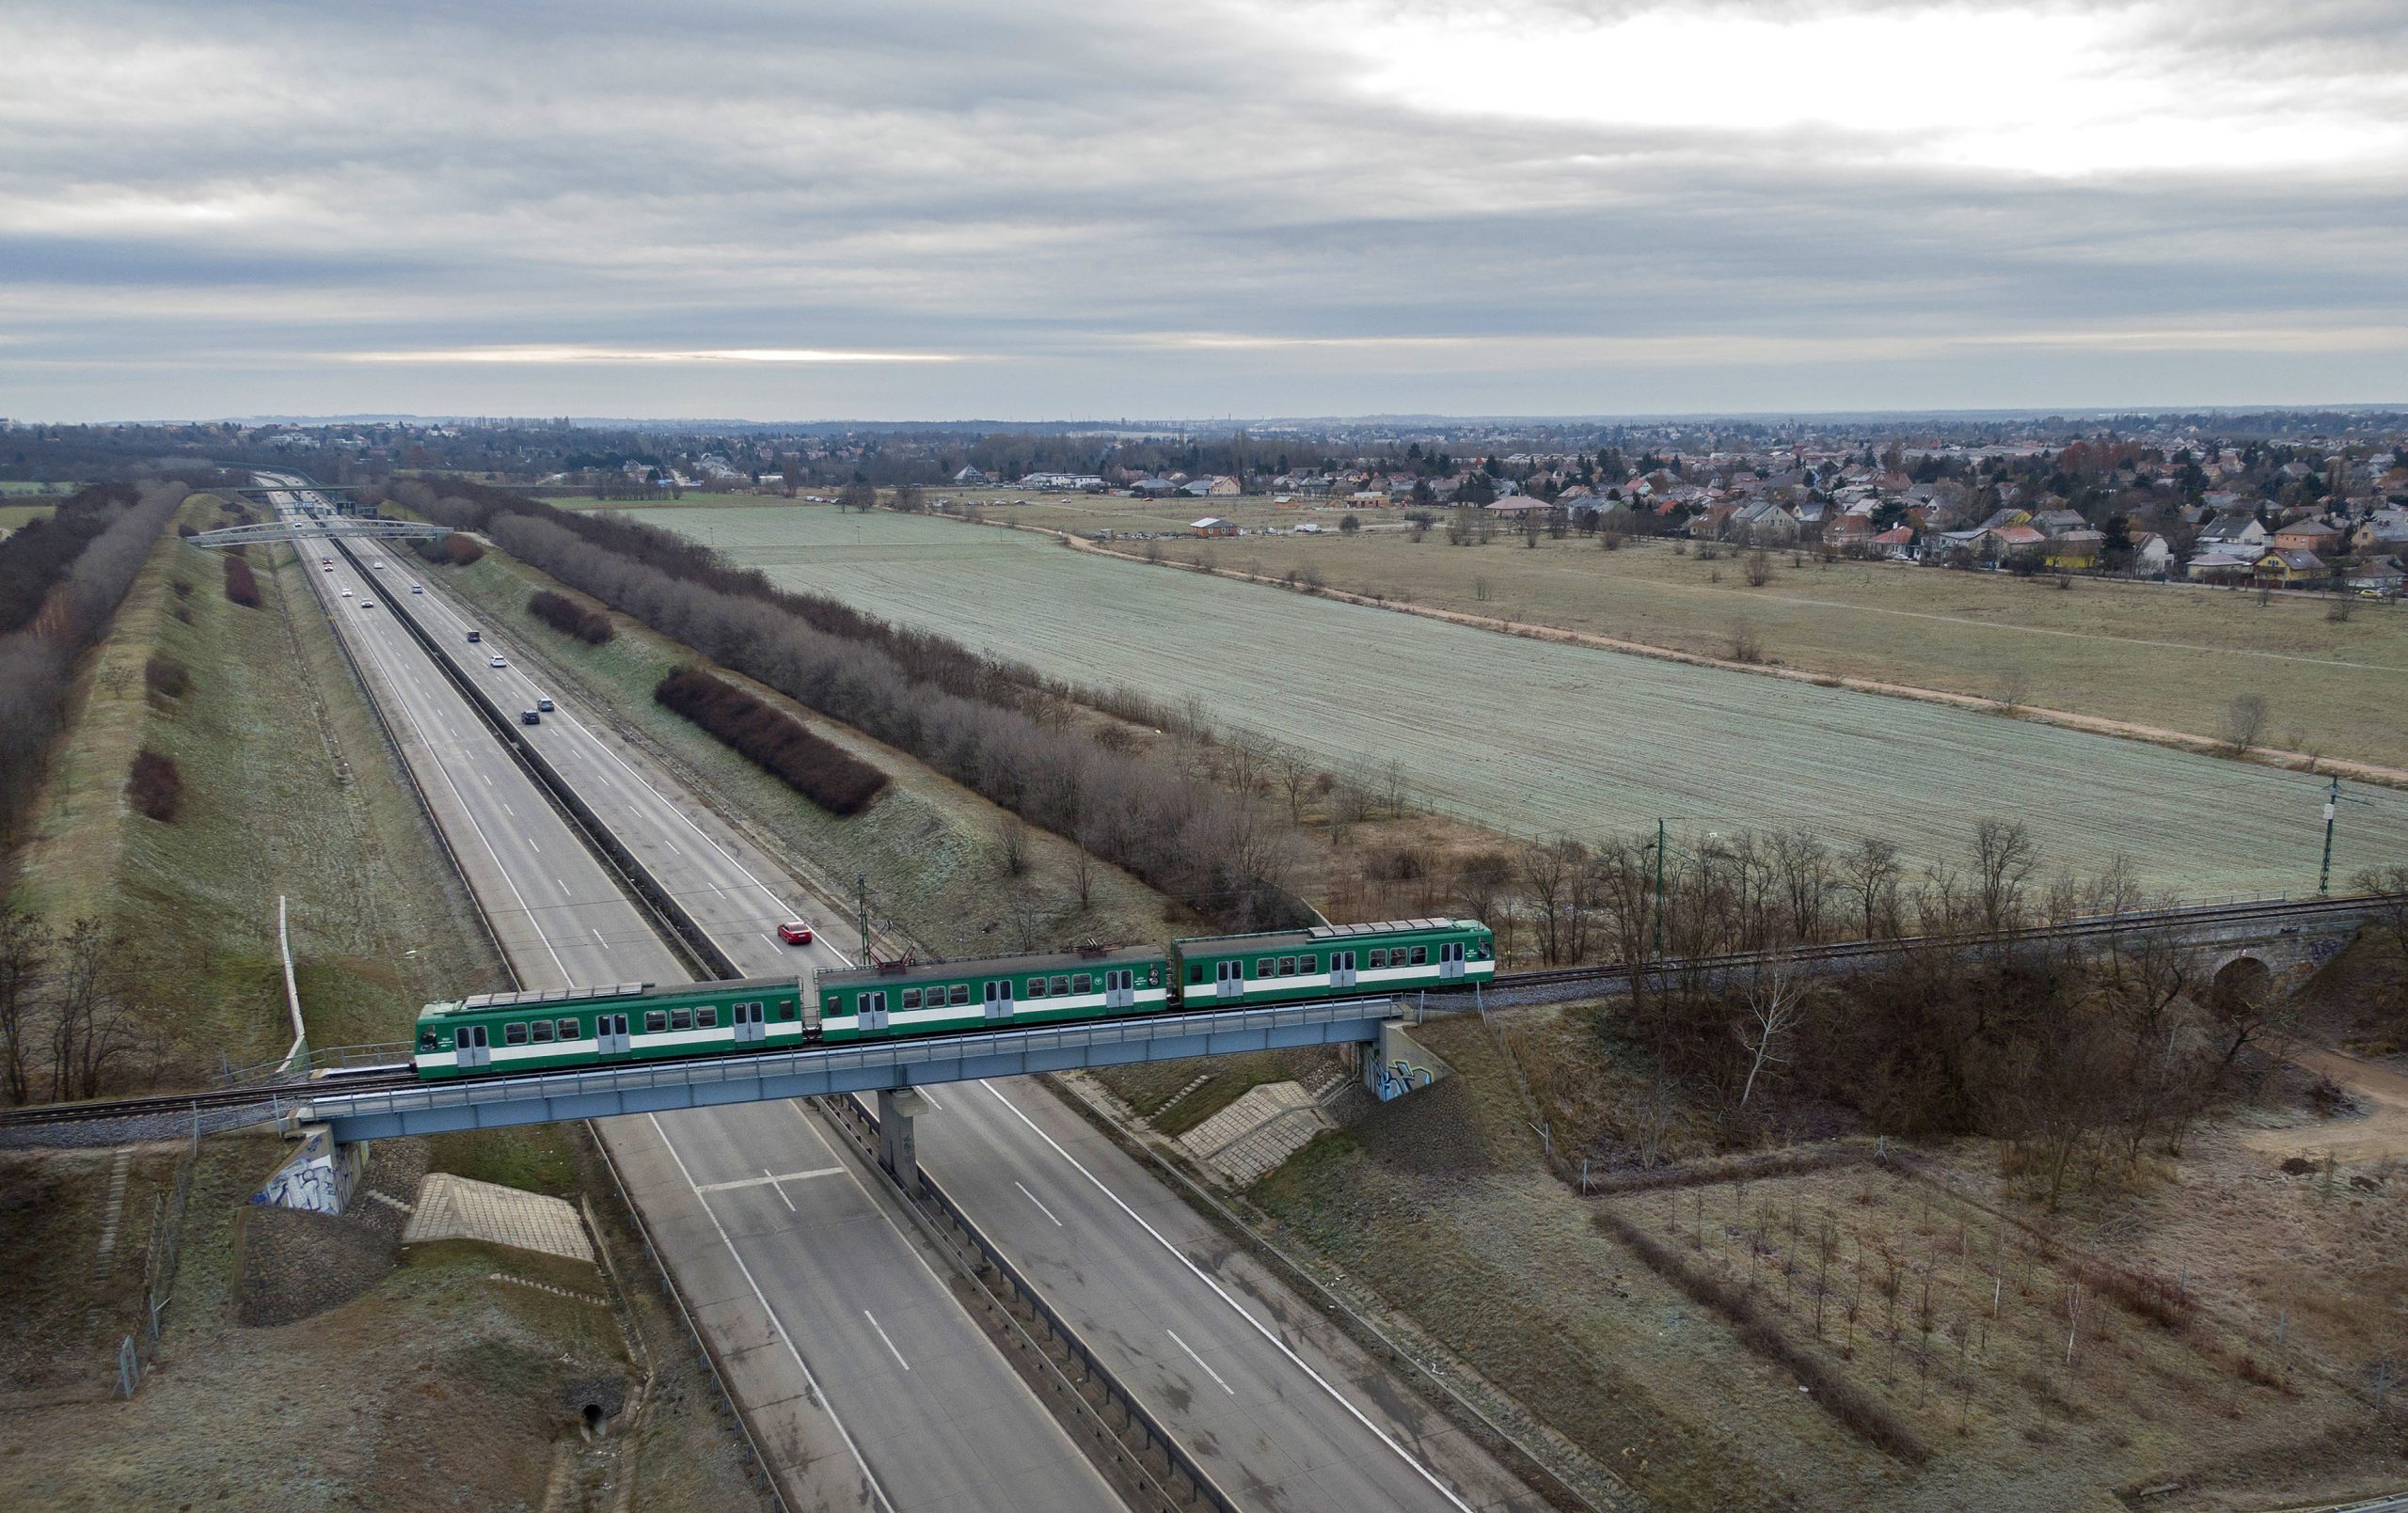 New Metro Line a Priority Investment Project in Budapest